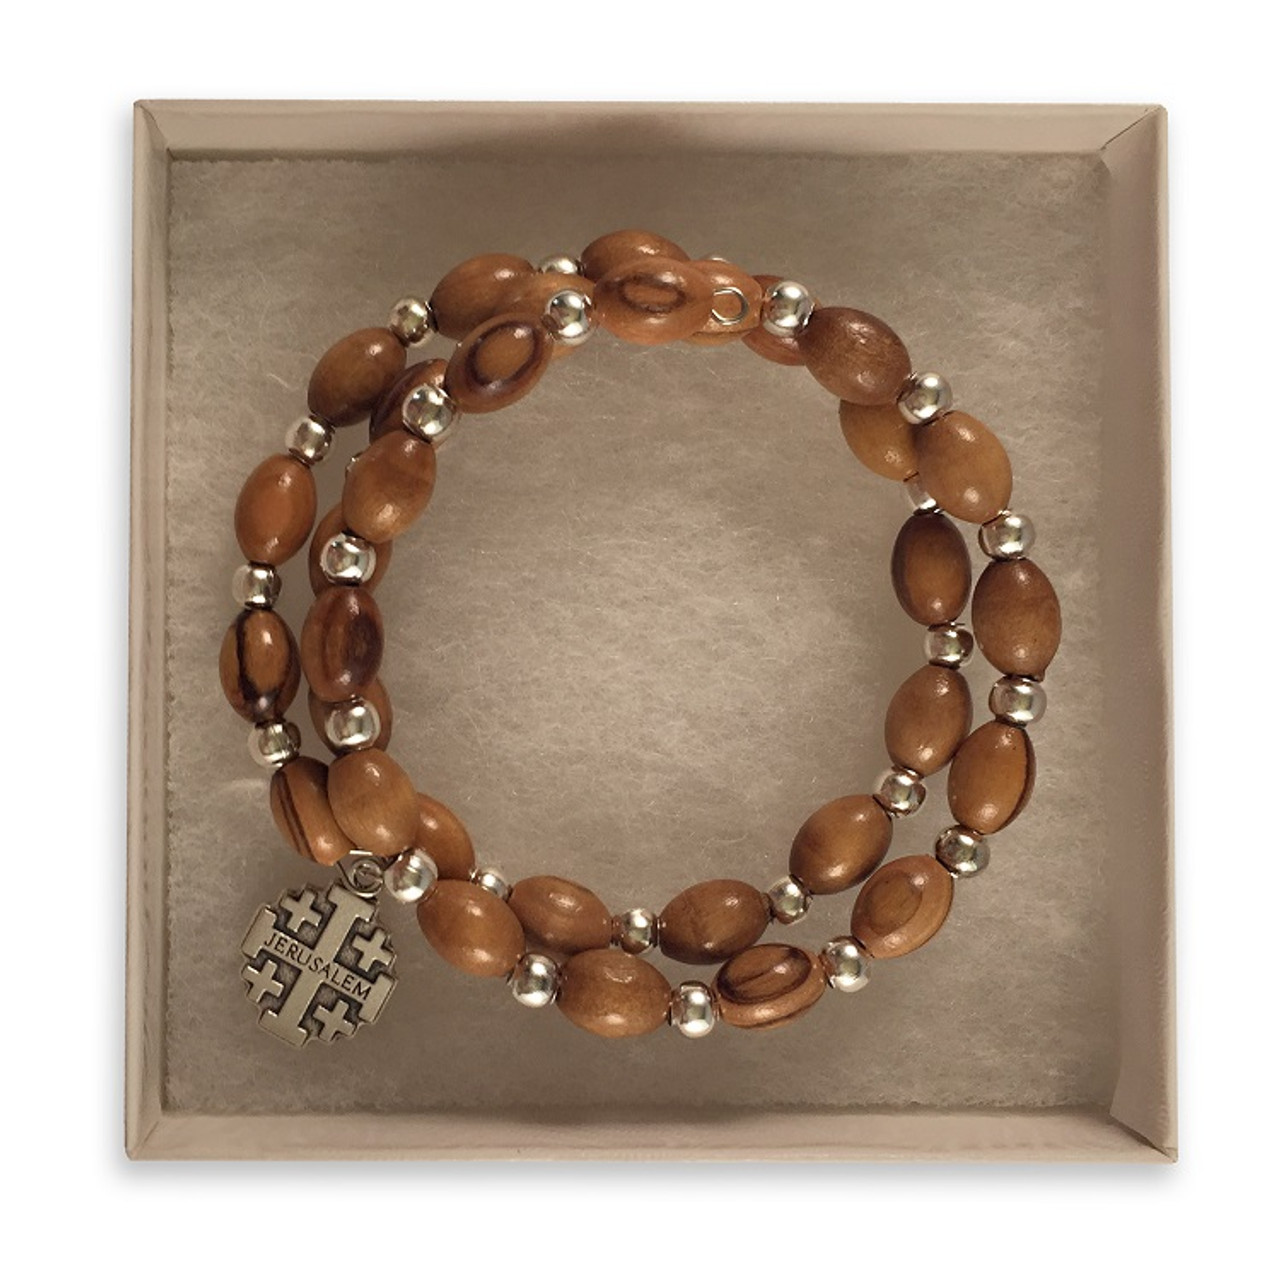 Prayer Bracelet with olive wood beads, wooden cross